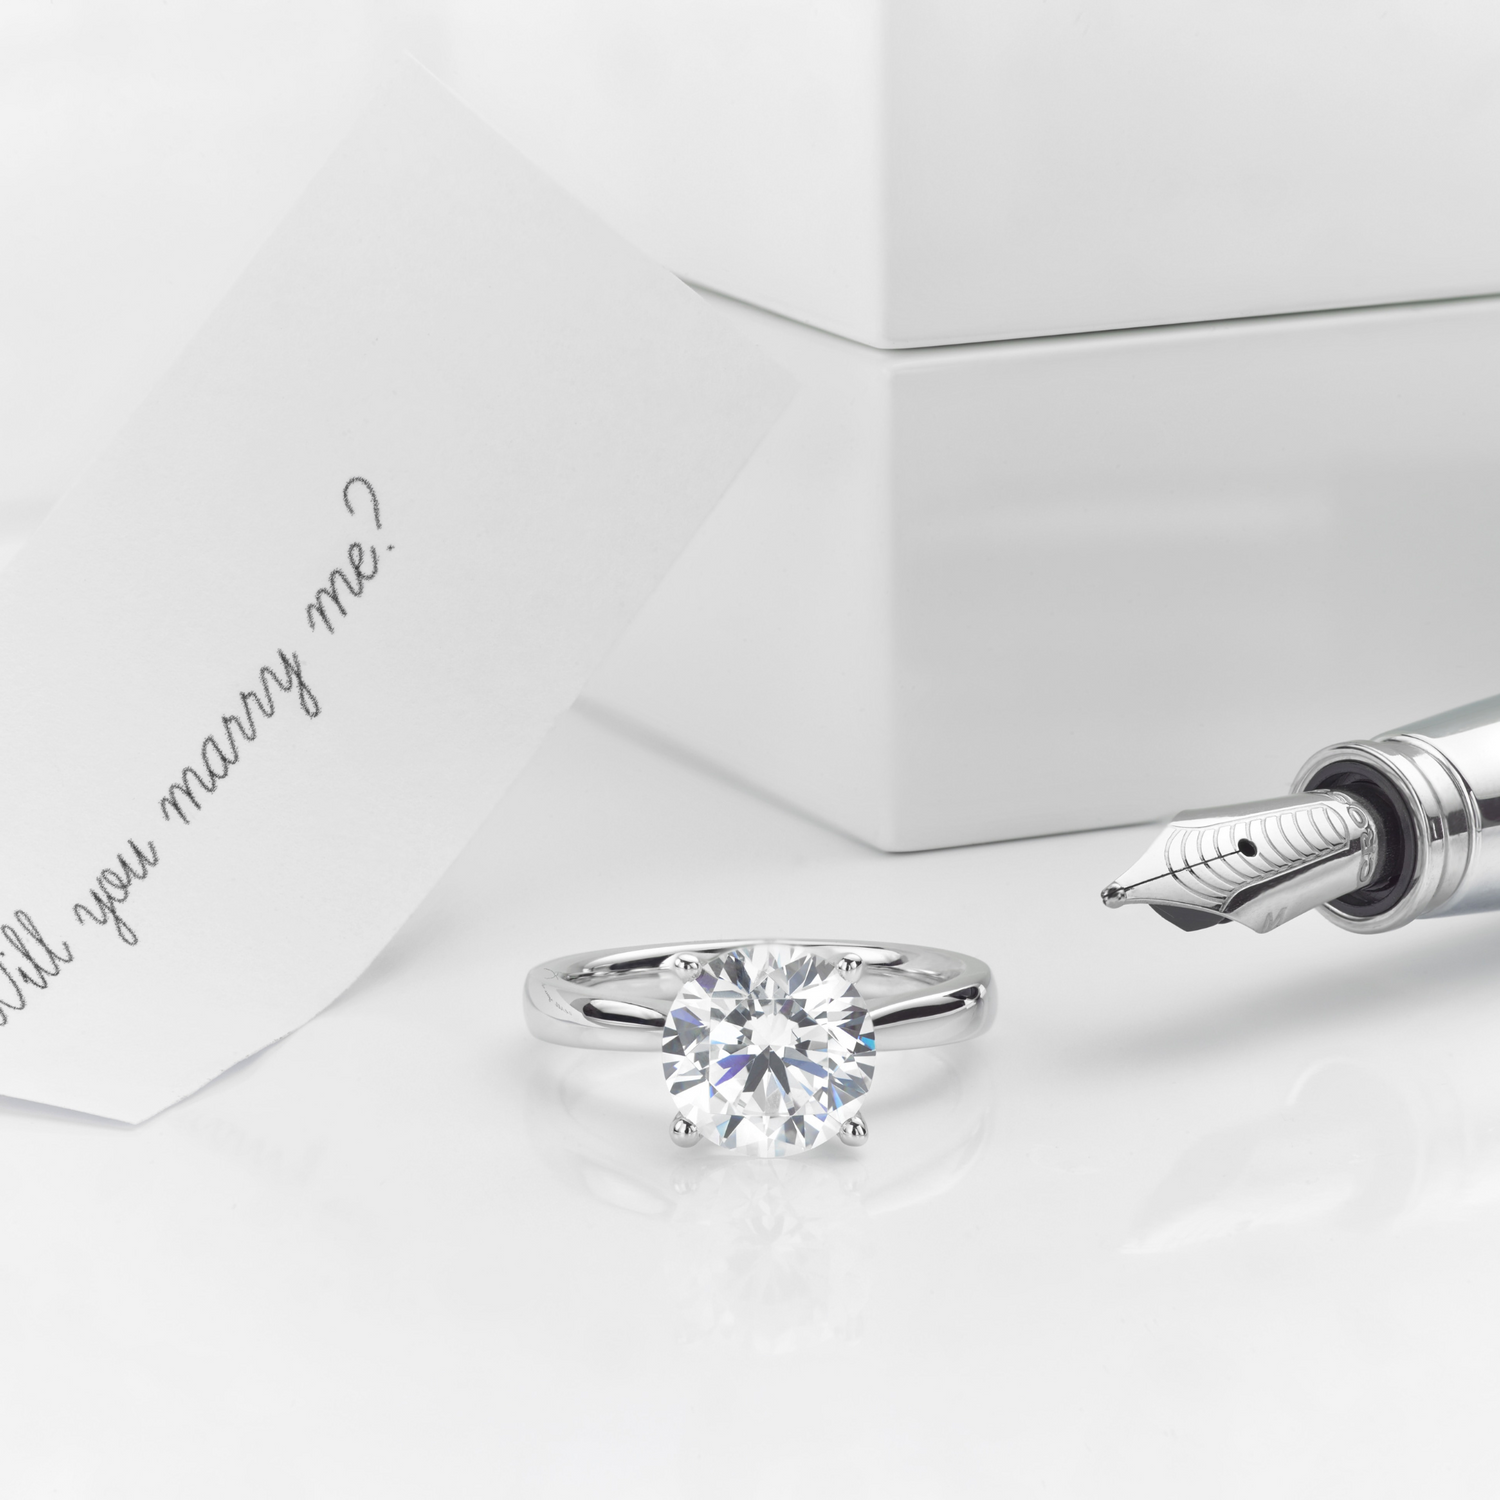 Silver and diamond ring with custom gift box 